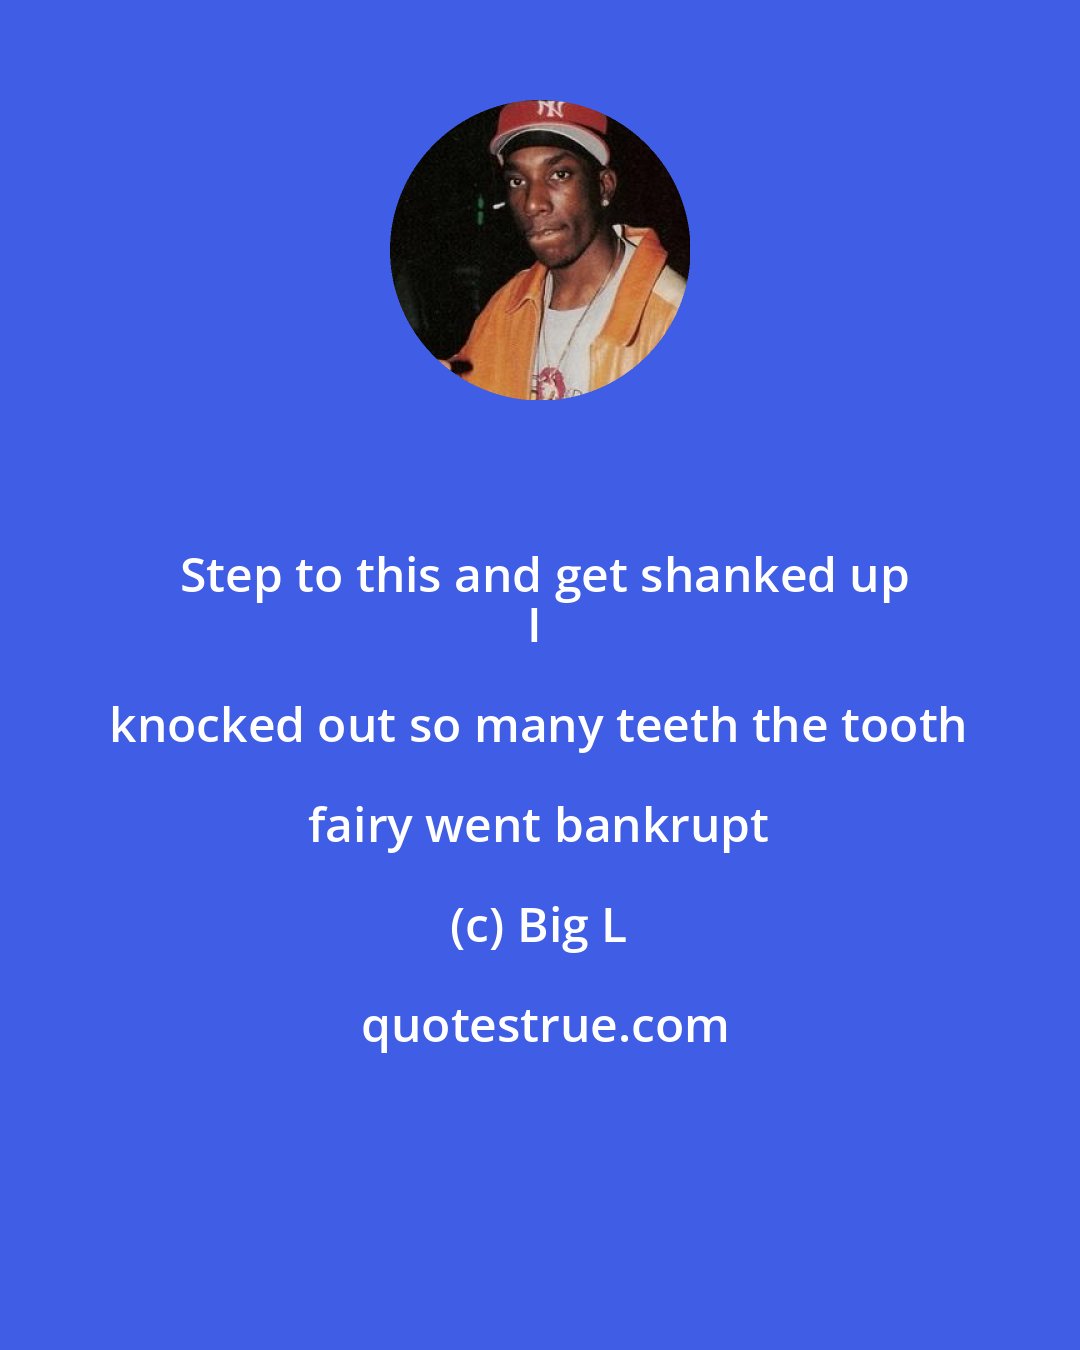 Big L: Step to this and get shanked up
I knocked out so many teeth the tooth fairy went bankrupt